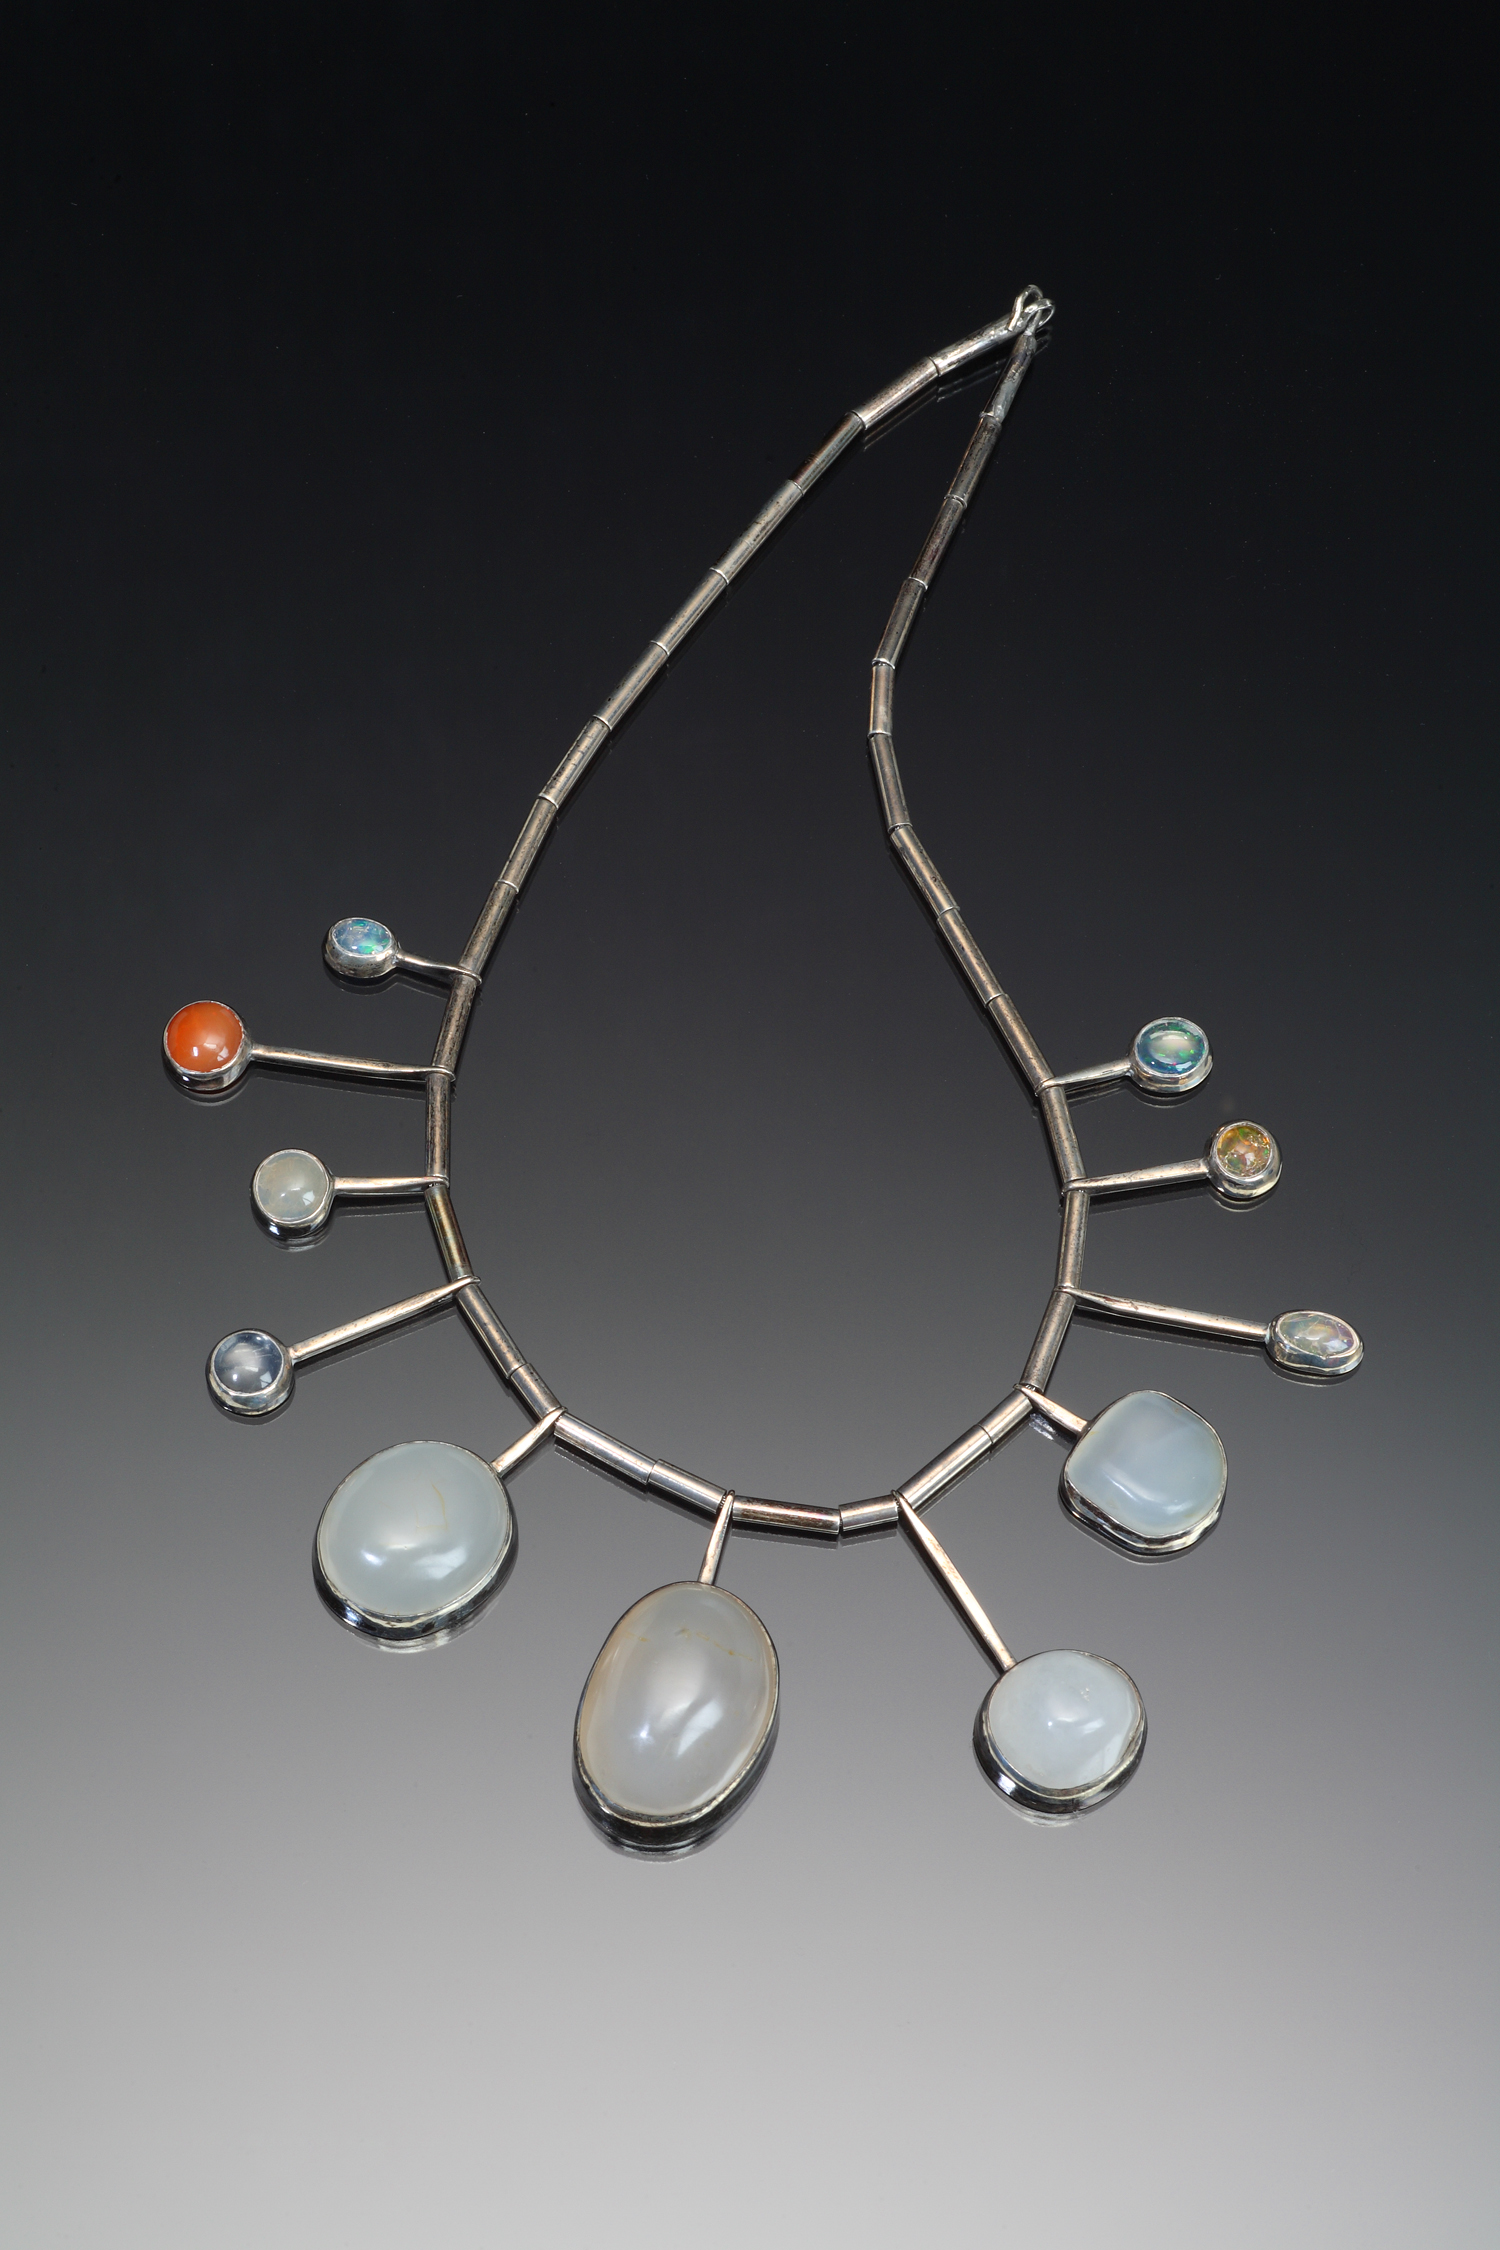 Studio Jewelry at TAM – The Christopher and Alida Latham Display